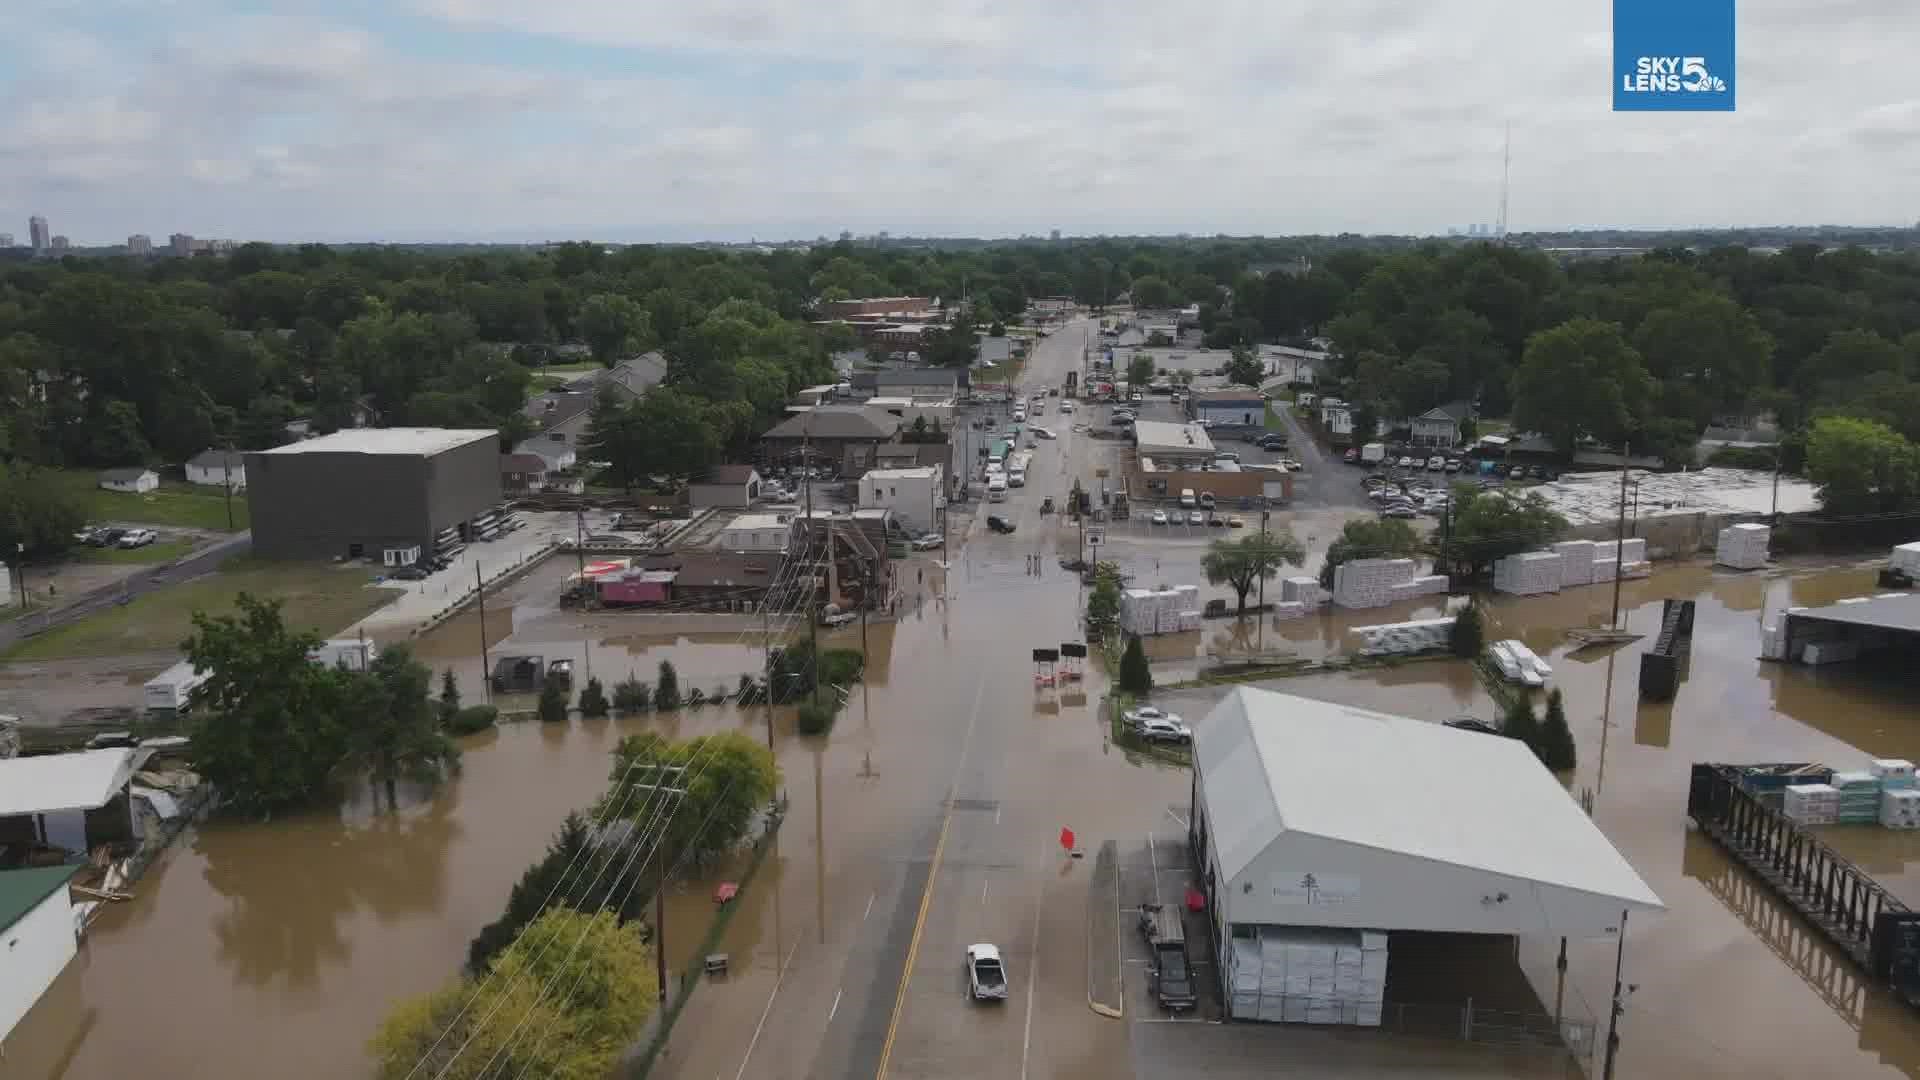 The National Weather Service St. Louis tweeted out that Deer Creek at Rock Hill had gone above major flood stage four times in just the past 10 days.